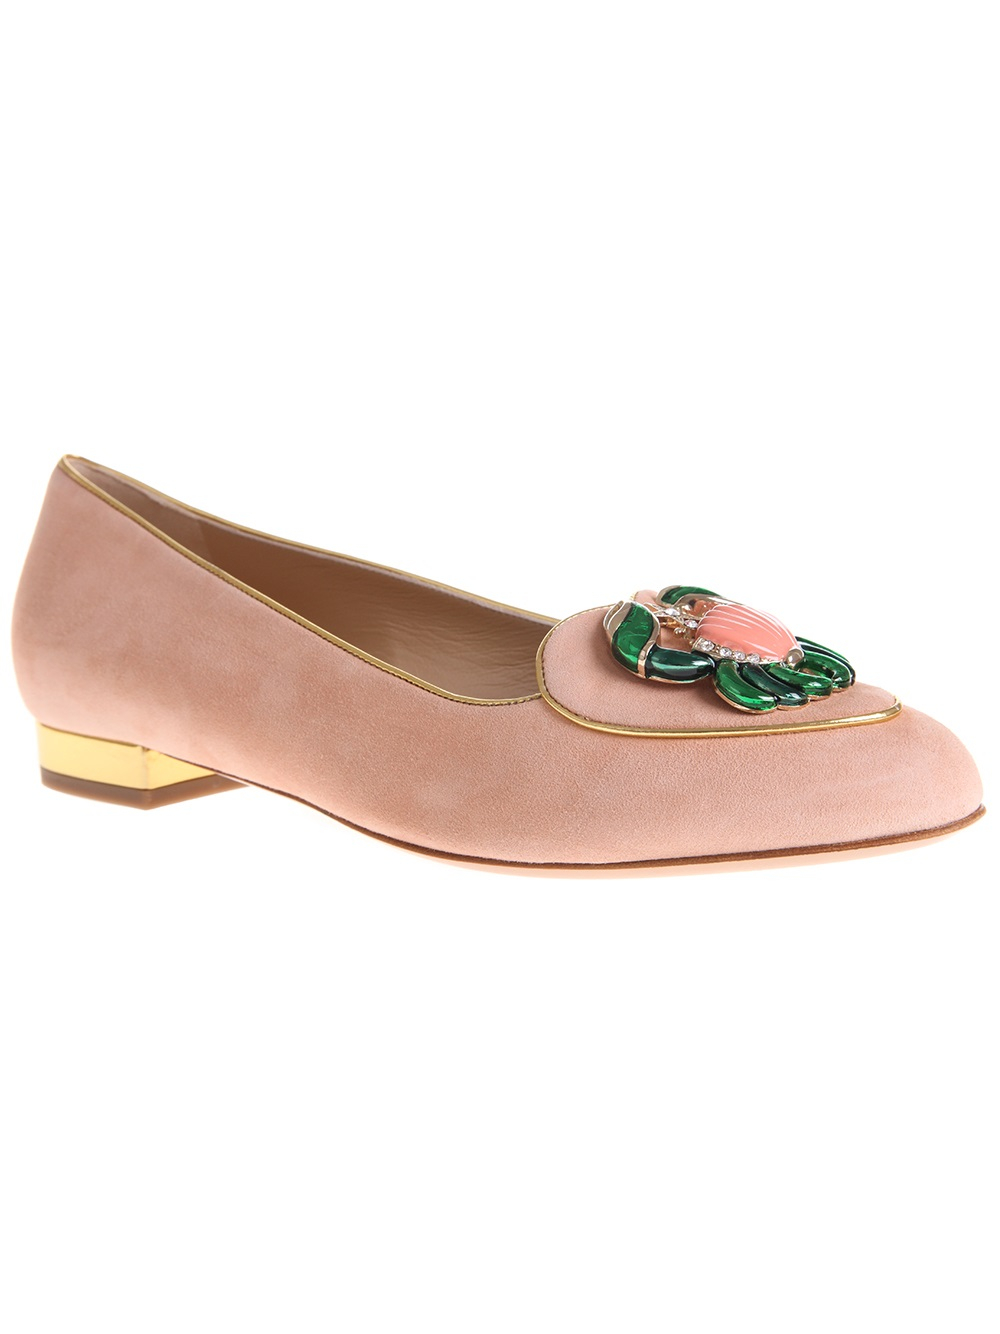 Lyst - Charlotte olympia Cancer Birthday Loafer in Pink